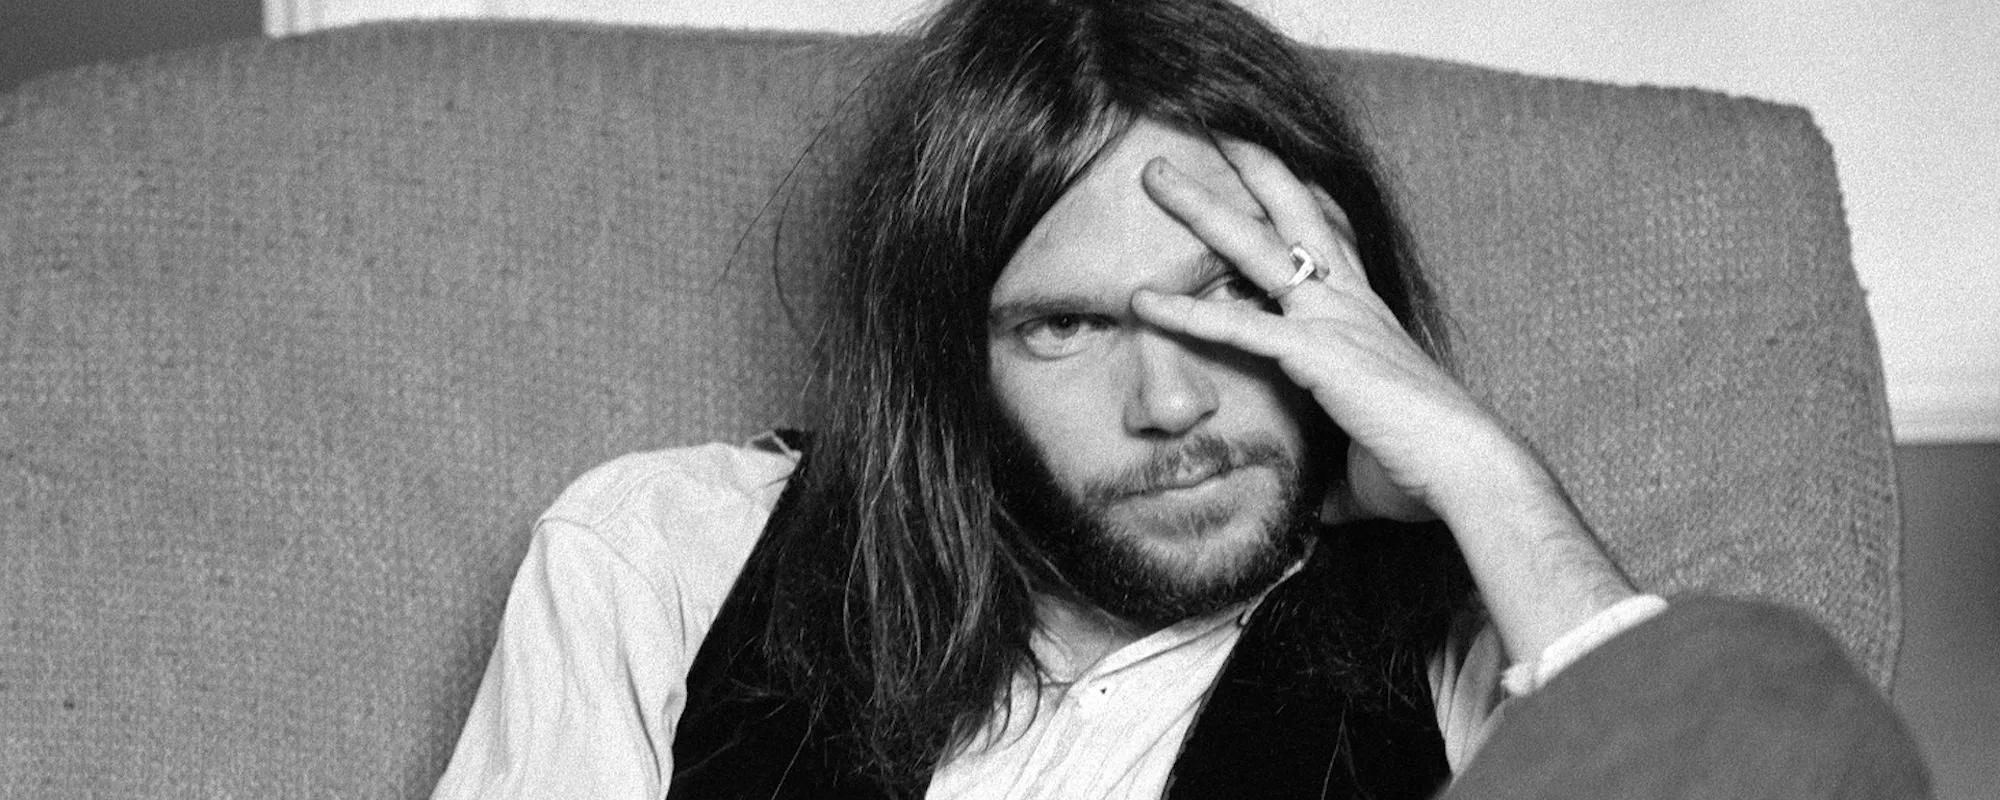 Why Is Neil Young Considered the “Godfather of Grunge?”